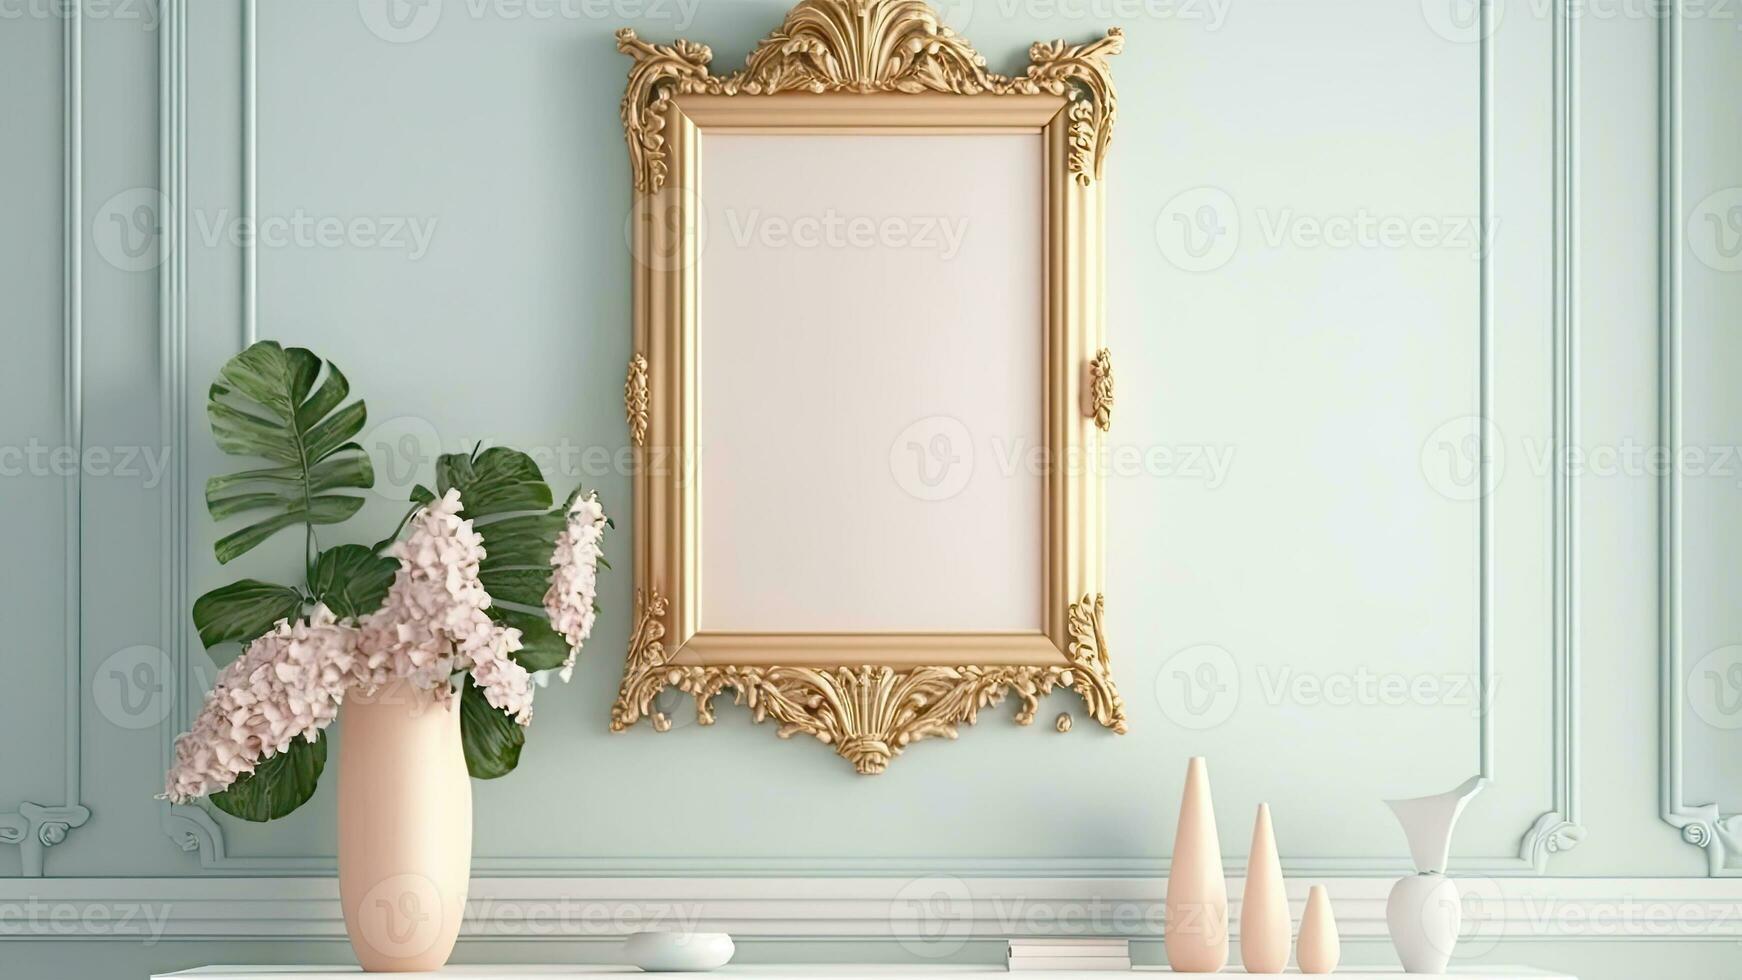 3D Render of Golden Vintage Frame Mockup With Image Placeholder On Classic Interior Wall And Plant Pot Over Desk. photo